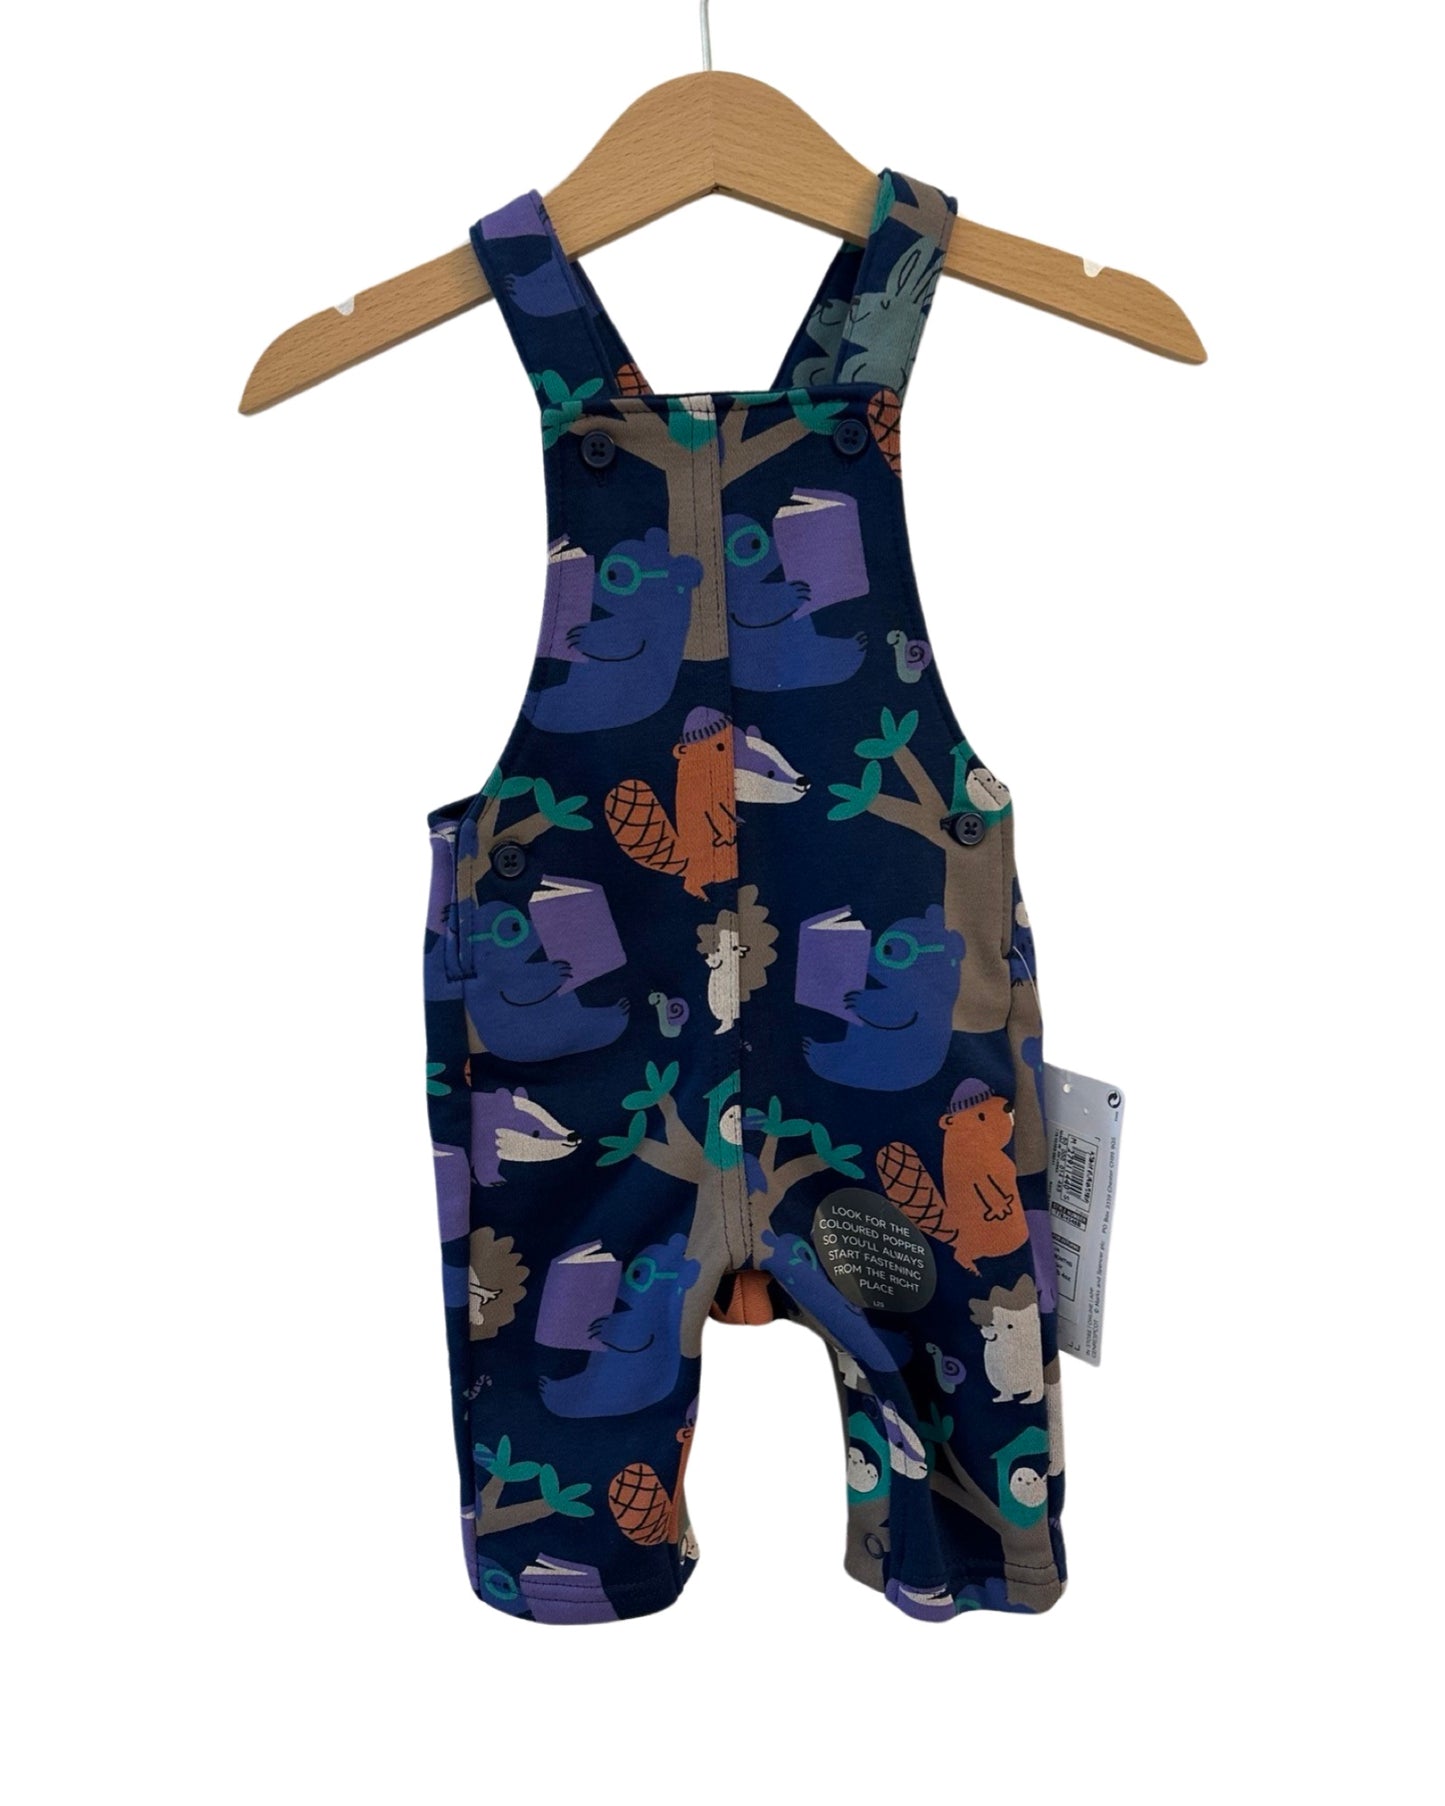 M&S printed navy dungarees (0-3mths)